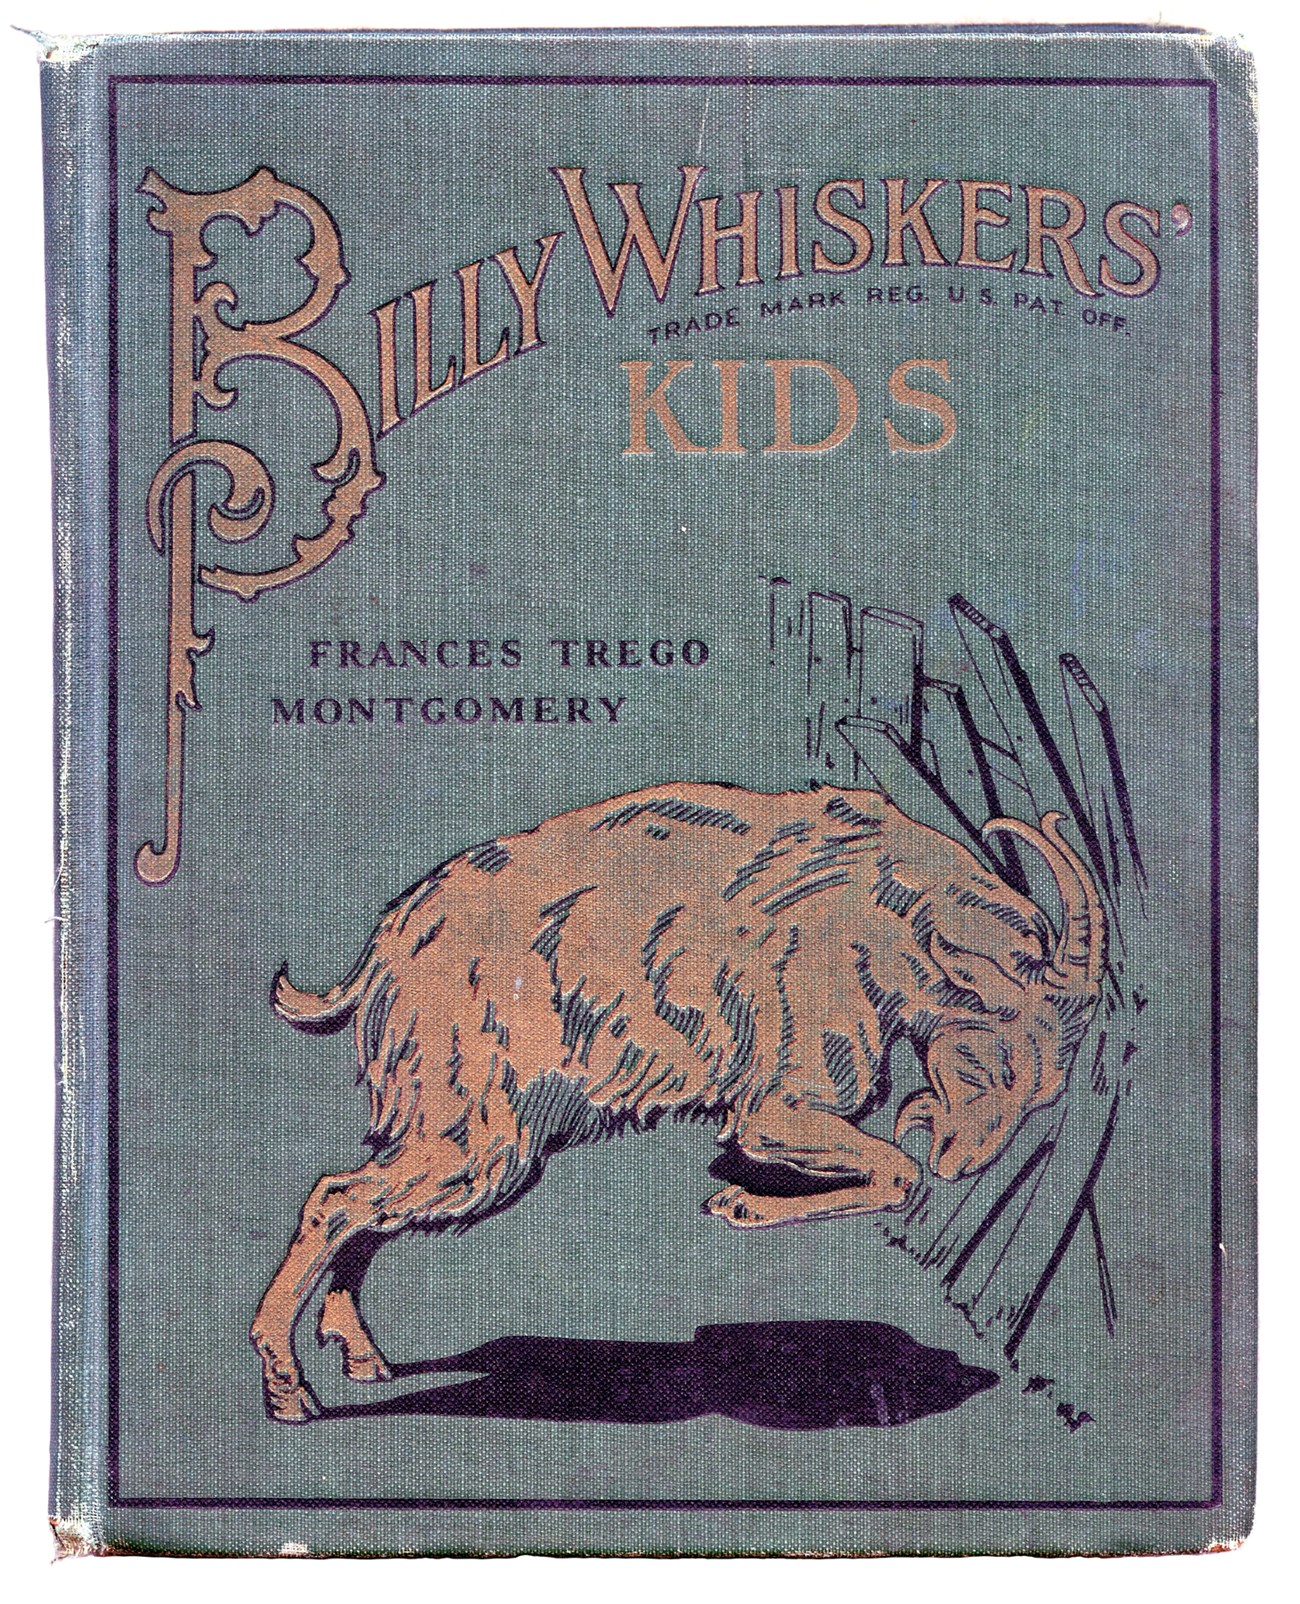 Book cover with illustration of a goat butting a fence on blue background with title Billy Whiskers' Kids